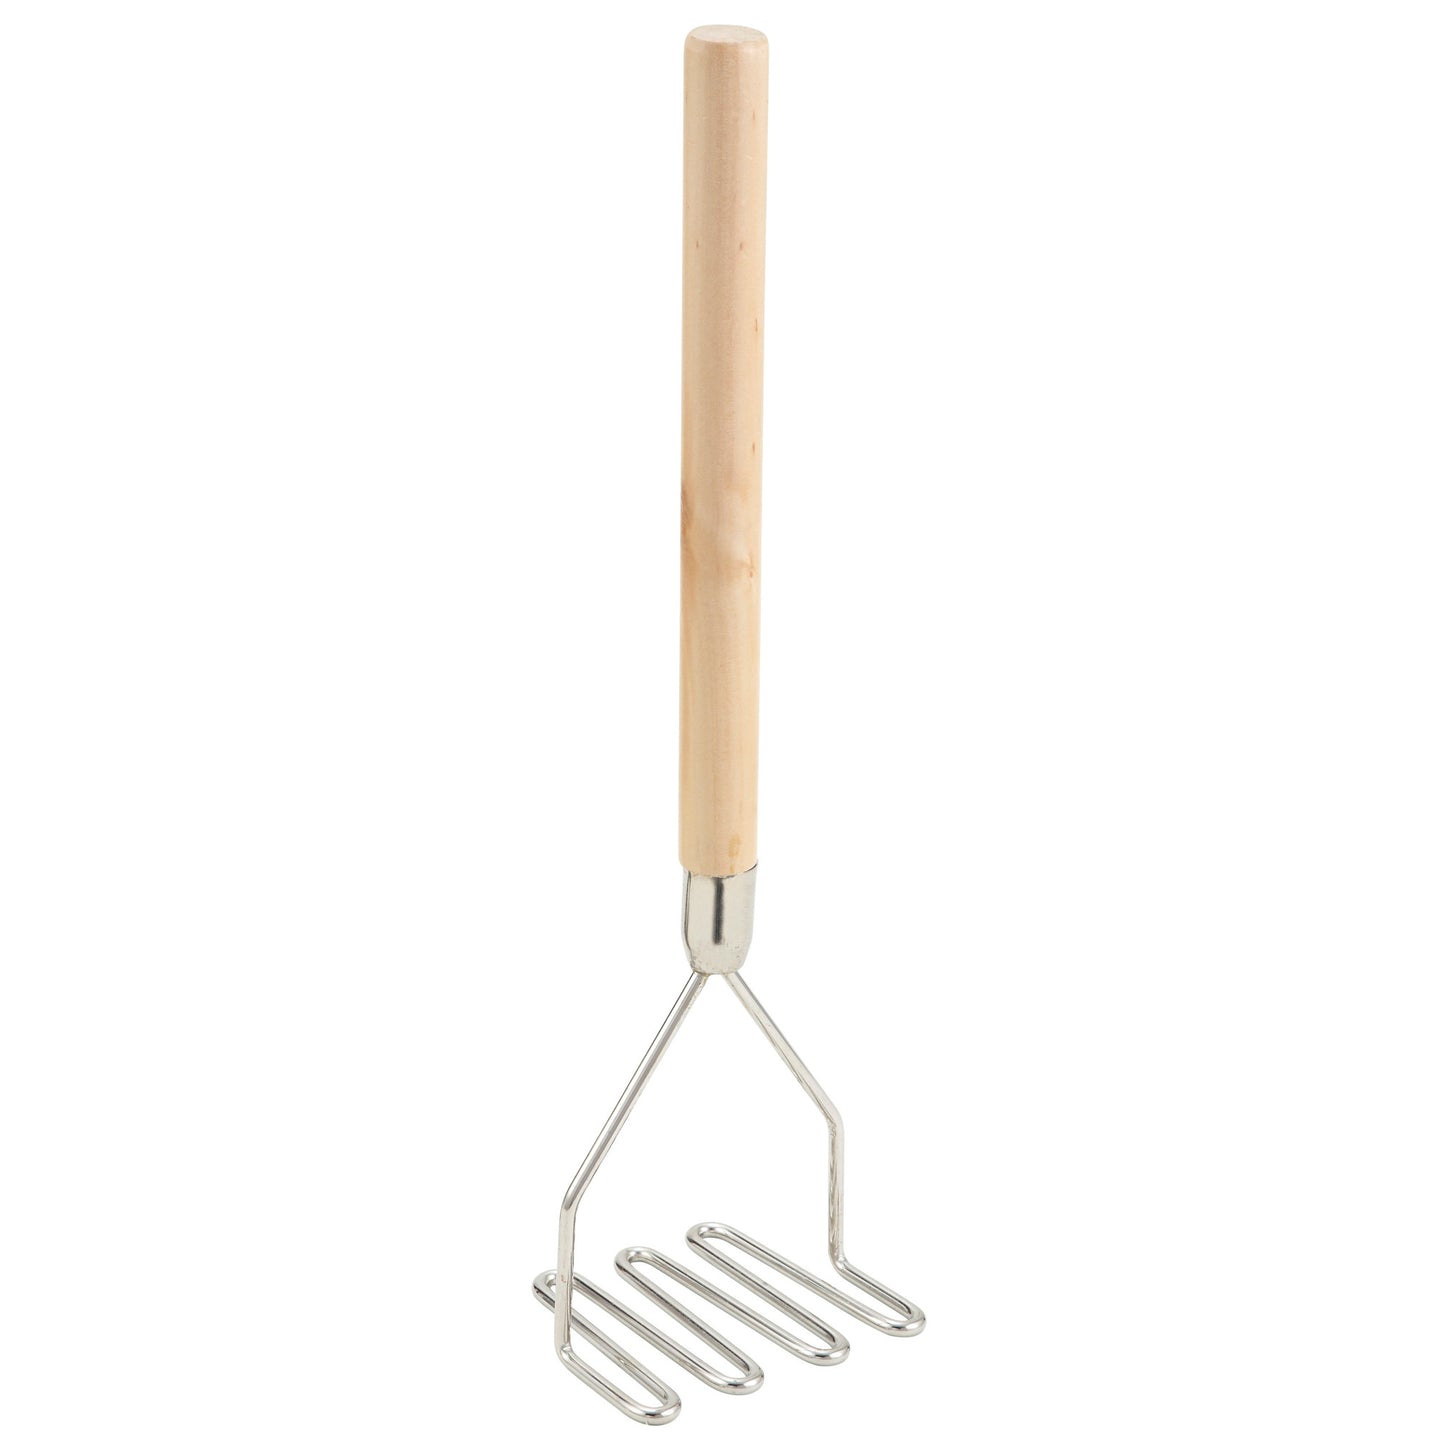 Potato Masher with Wooden Handle - 4-1/2"